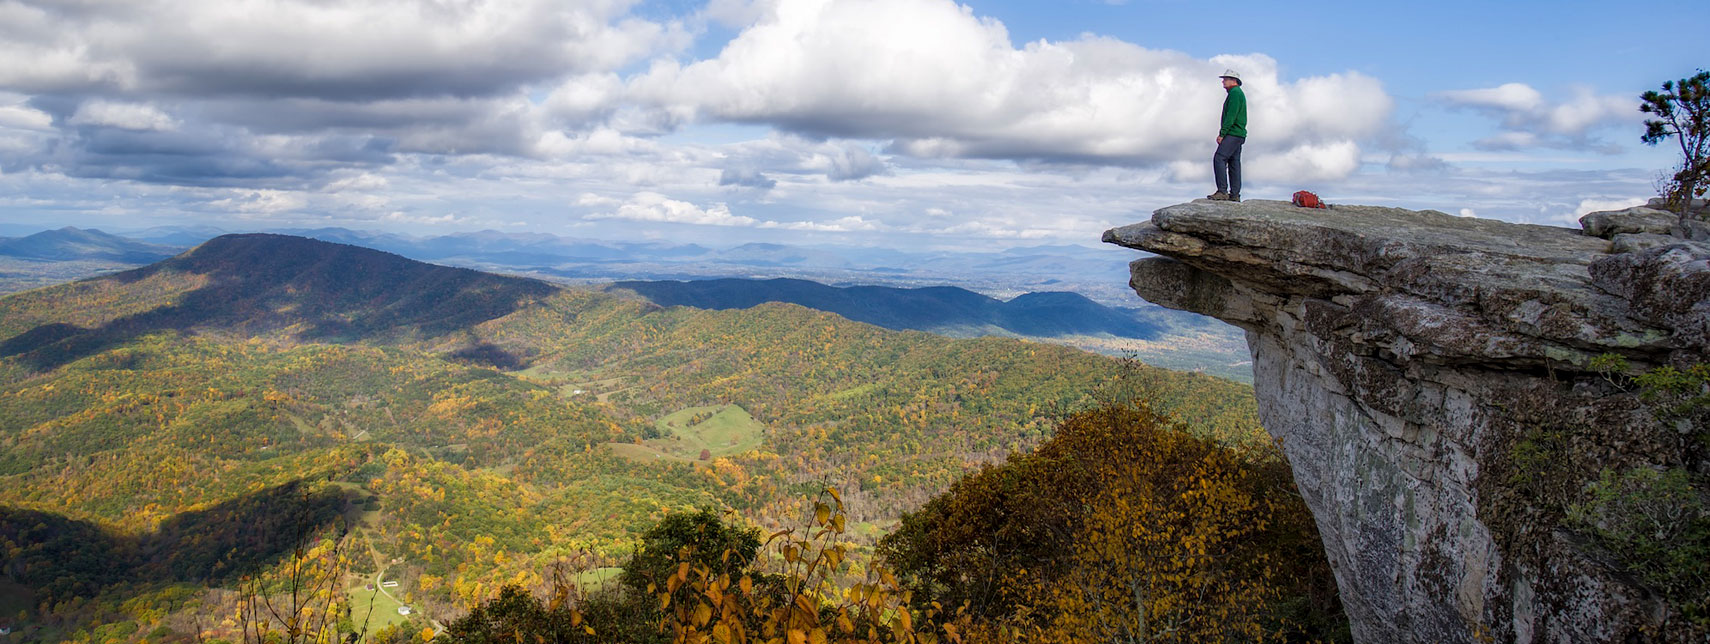 Catawba Valley from the McAfee Knob overlook along the Appalachian Trail.